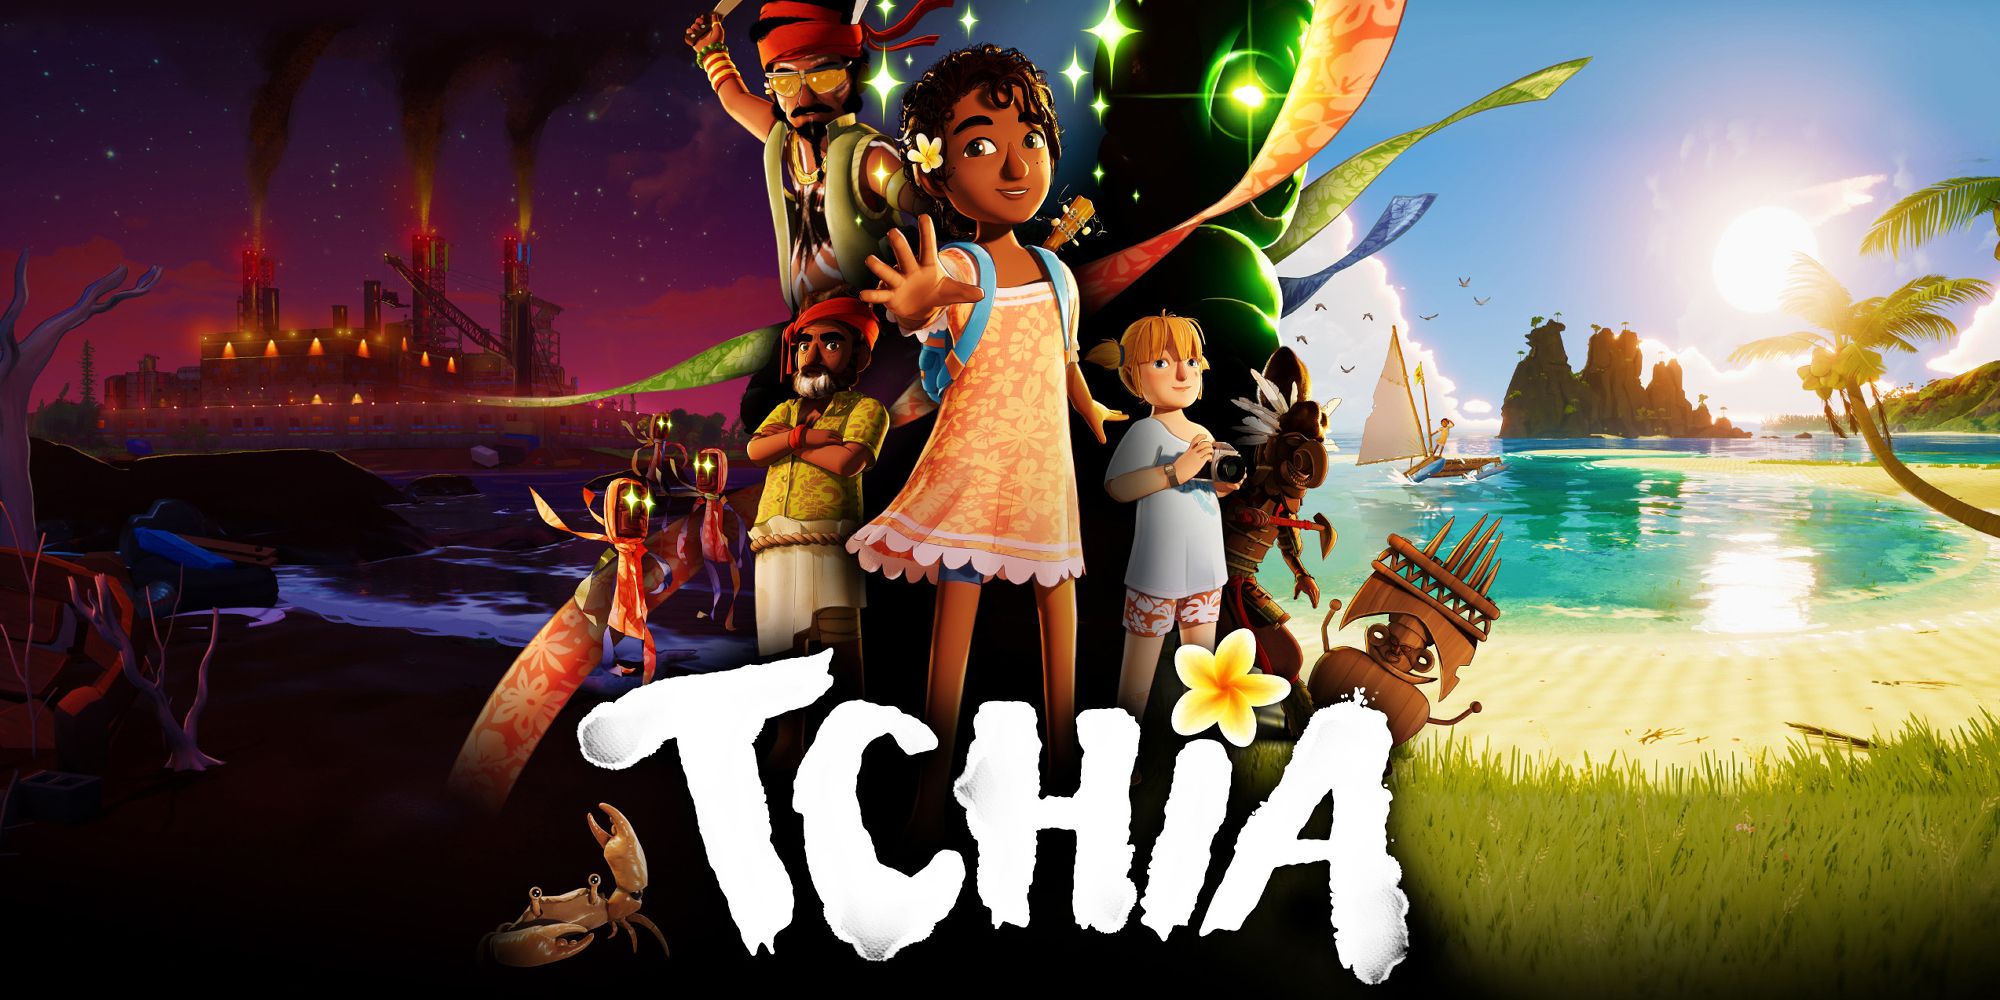 Tchia Cover Showing Tchia, Allies, Enemies, And Animals On The Islands